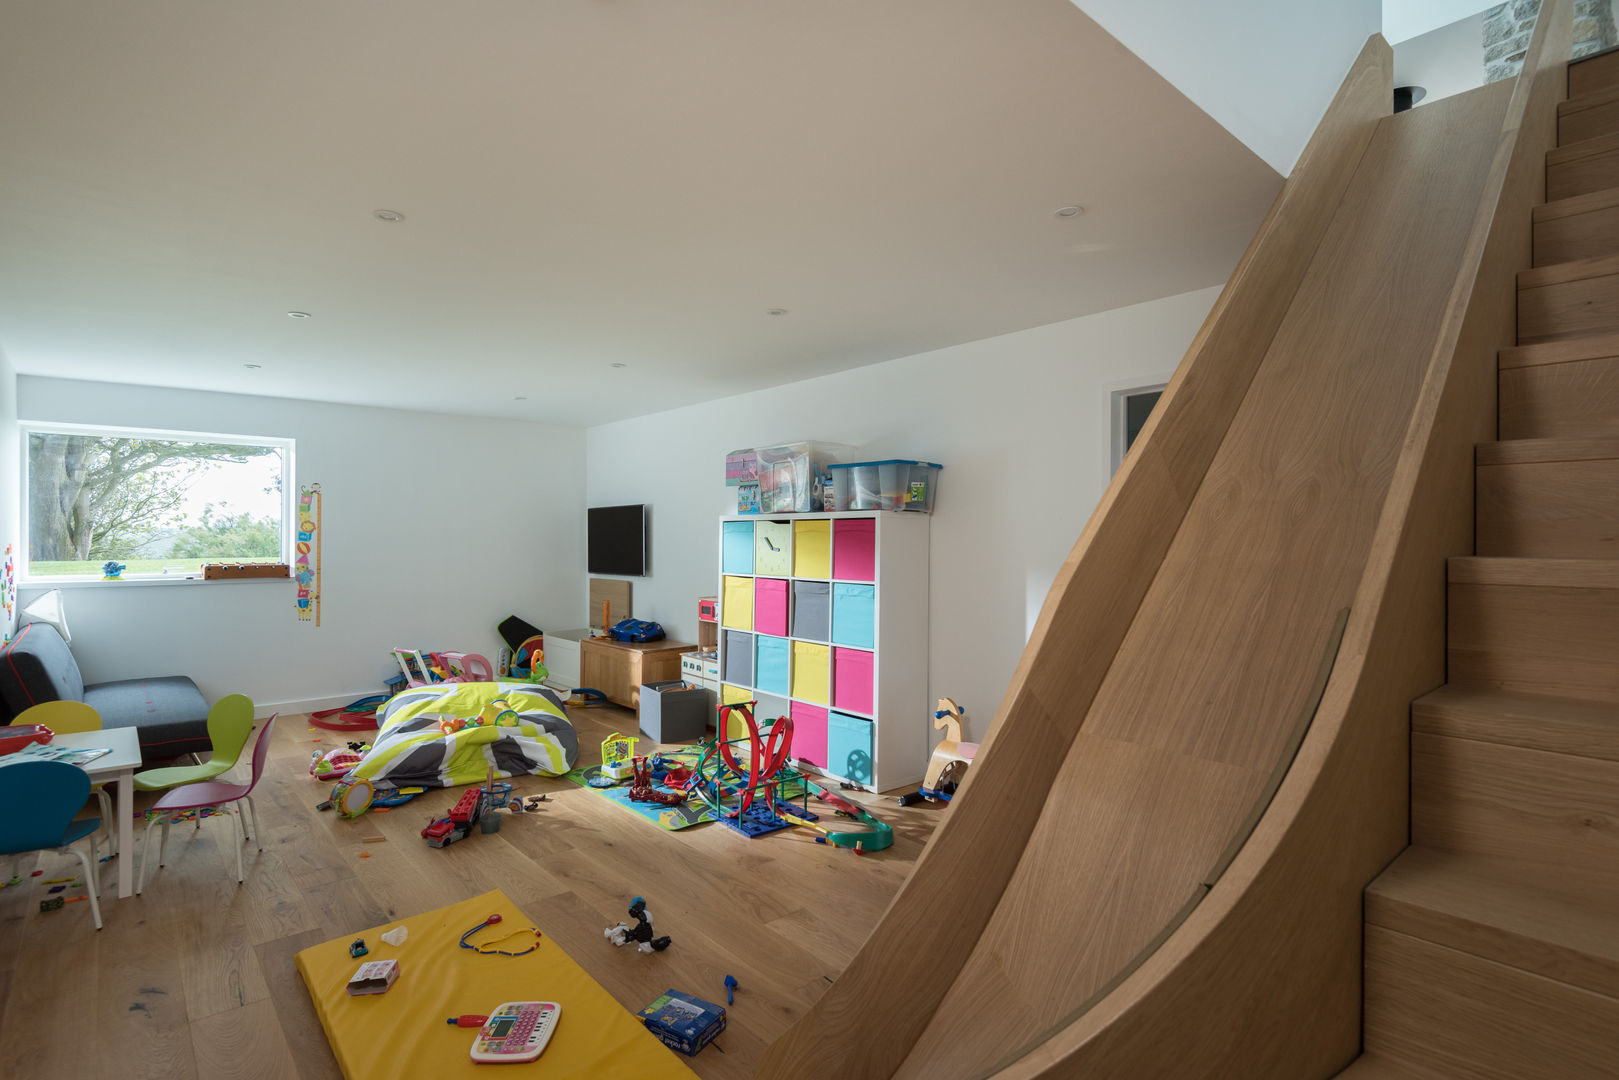 Contemporary Replacement Dwelling, Cubert, Laurence Associates Laurence Associates Quarto infantil moderno play room,game room,internal slide,fun,games,storage,children,toys,modular storage,bright colours,play,kids room